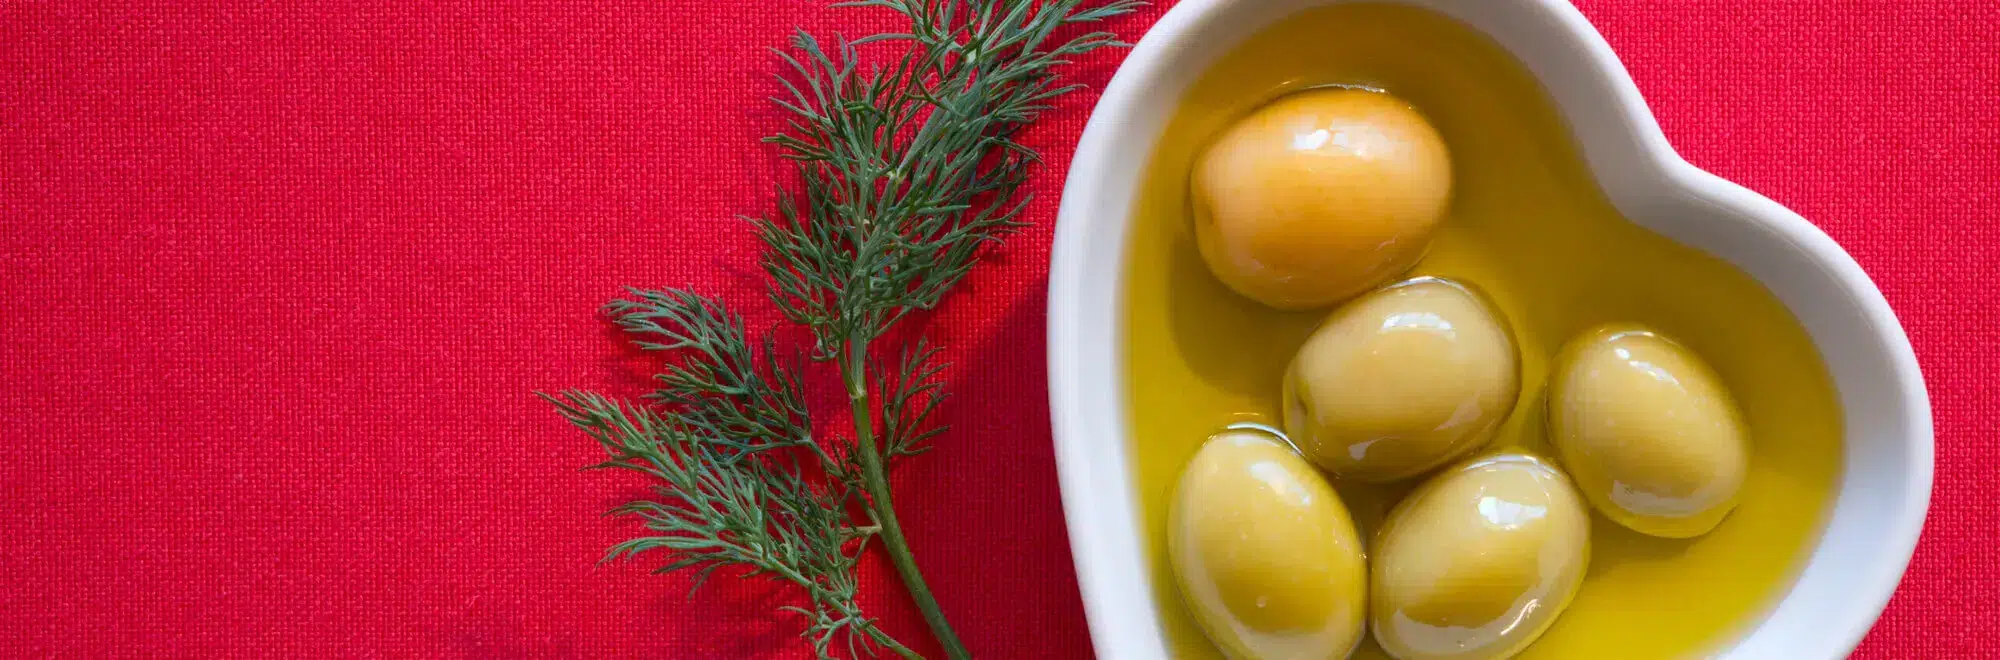 How to reduce high cholesterol with olive oil